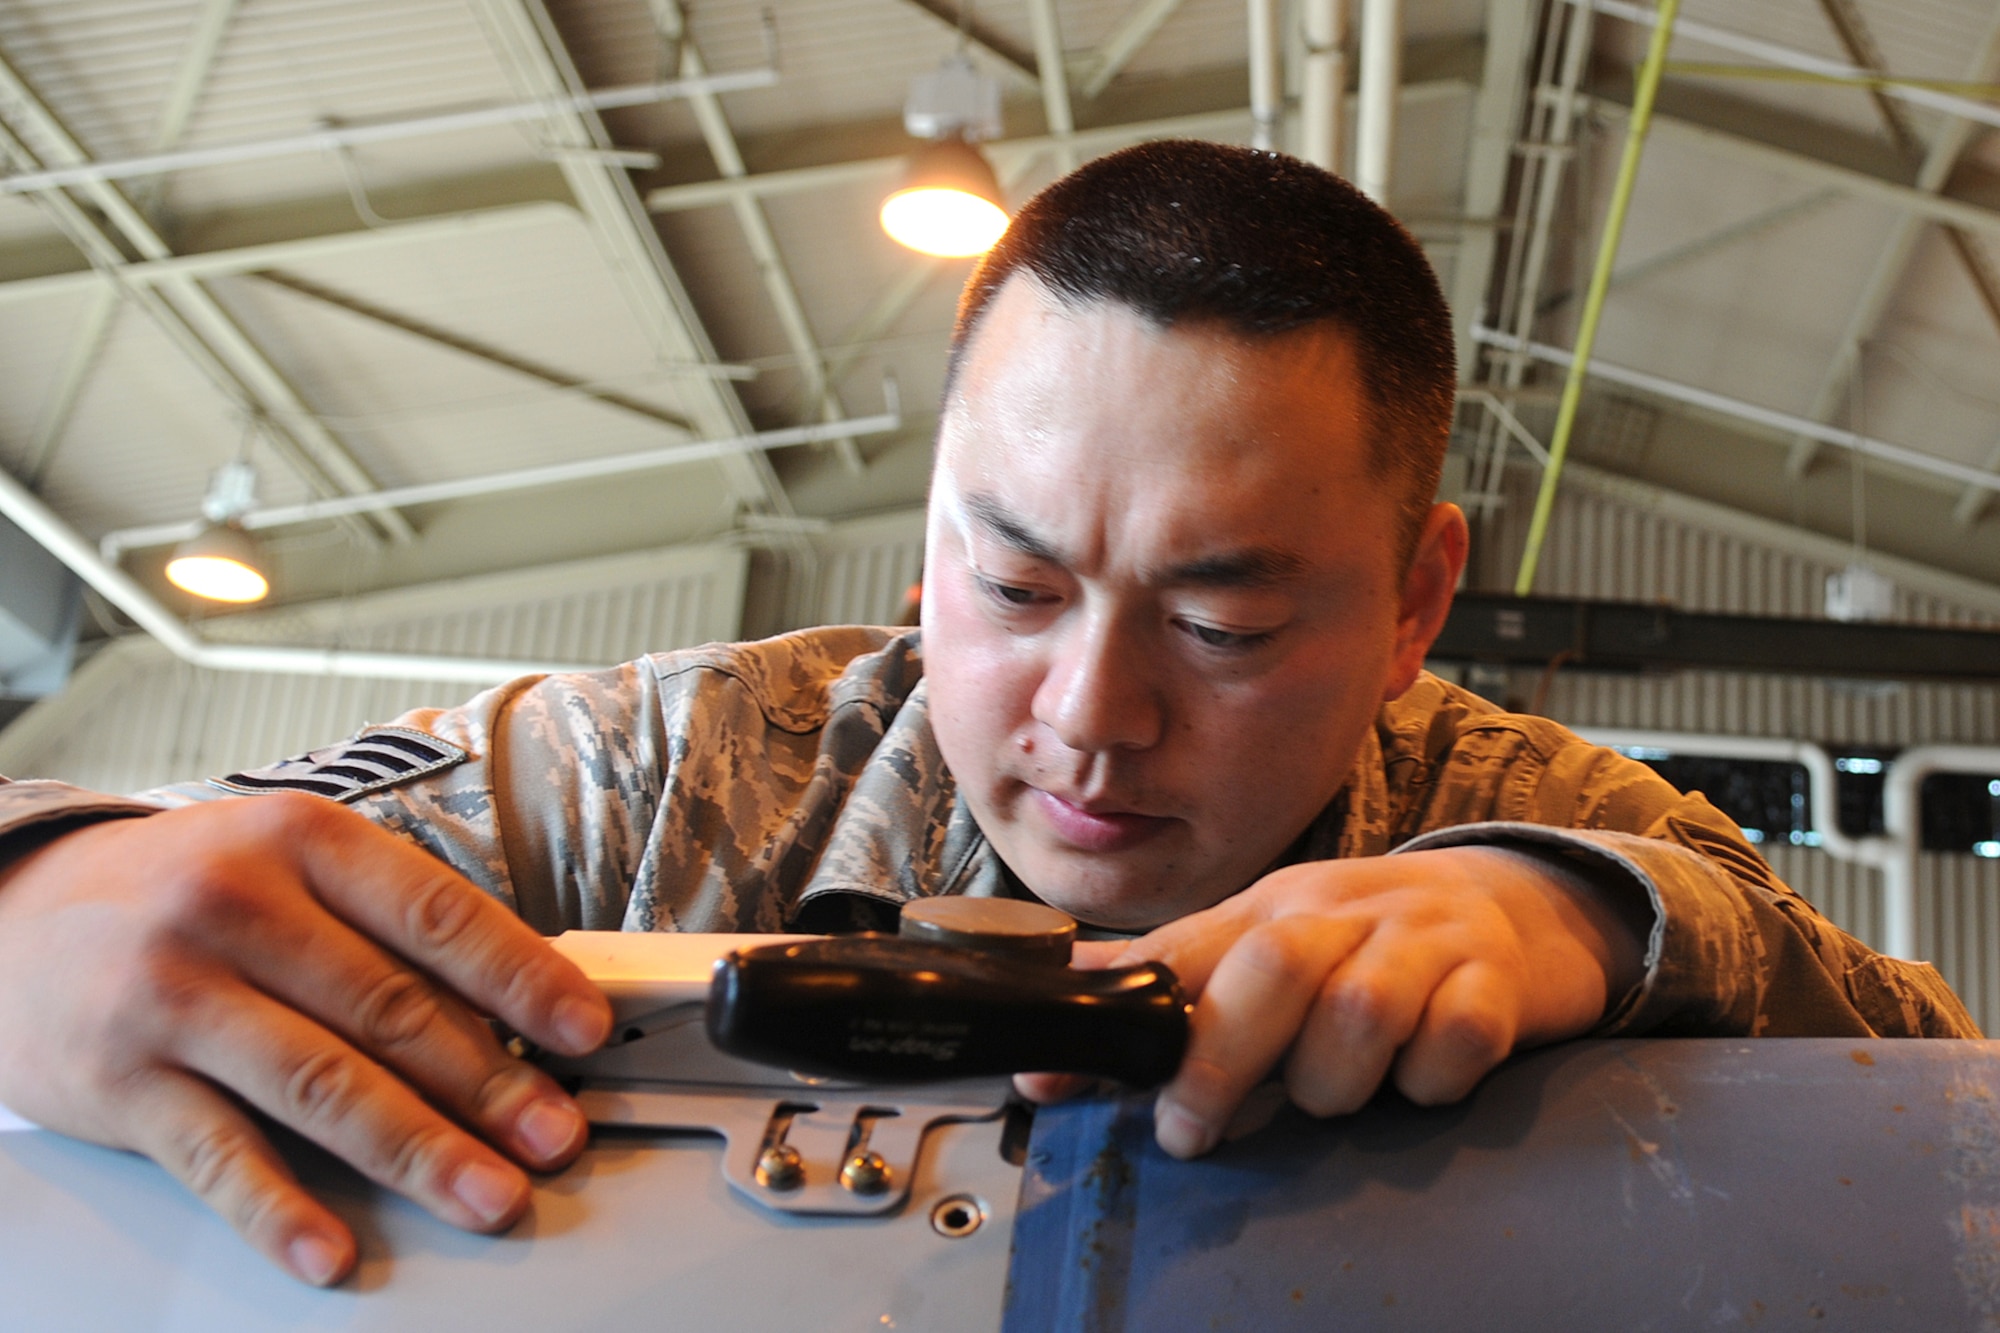 MISAWA AIR BASE, Japan -- Staff Sgt. James Davis, 35th Maintenance Squadron munitions flight crew member, repositions the umbilical connector on a GBU-38 June 9, 2009. The umbilical connector serves as an interface between the bomb and pilot, allowing the pilot to change fuse settings while in flight. Sergeant Davis is a native of Del Rio, Texas. (U.S. Air Force photo by Staff Sgt. Rachel Martinez)